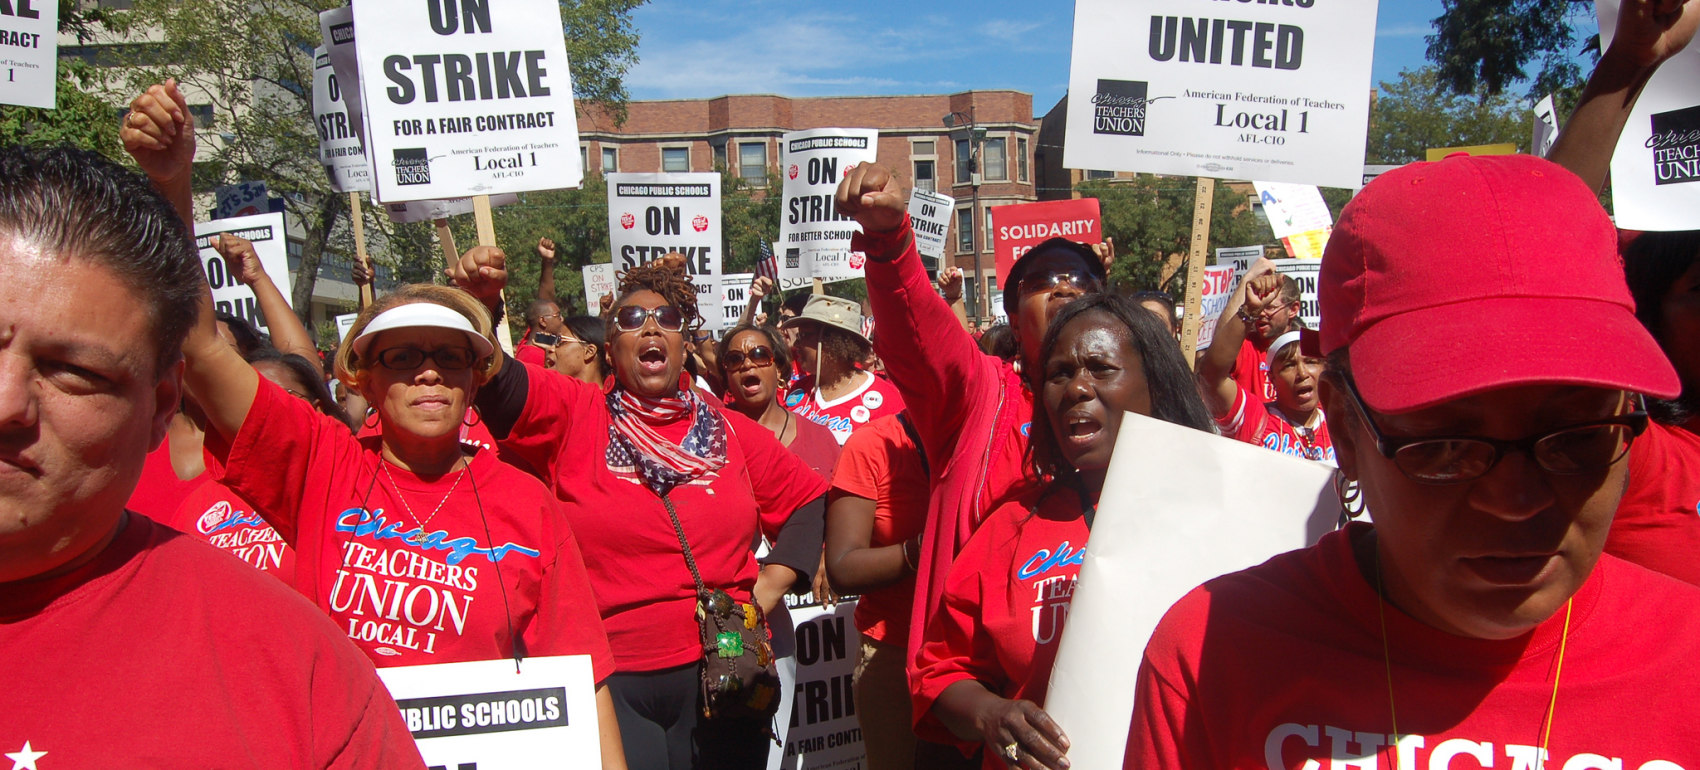 illinois-teachers-saw-union-dues-flow-to-chicago-groups-politics-and